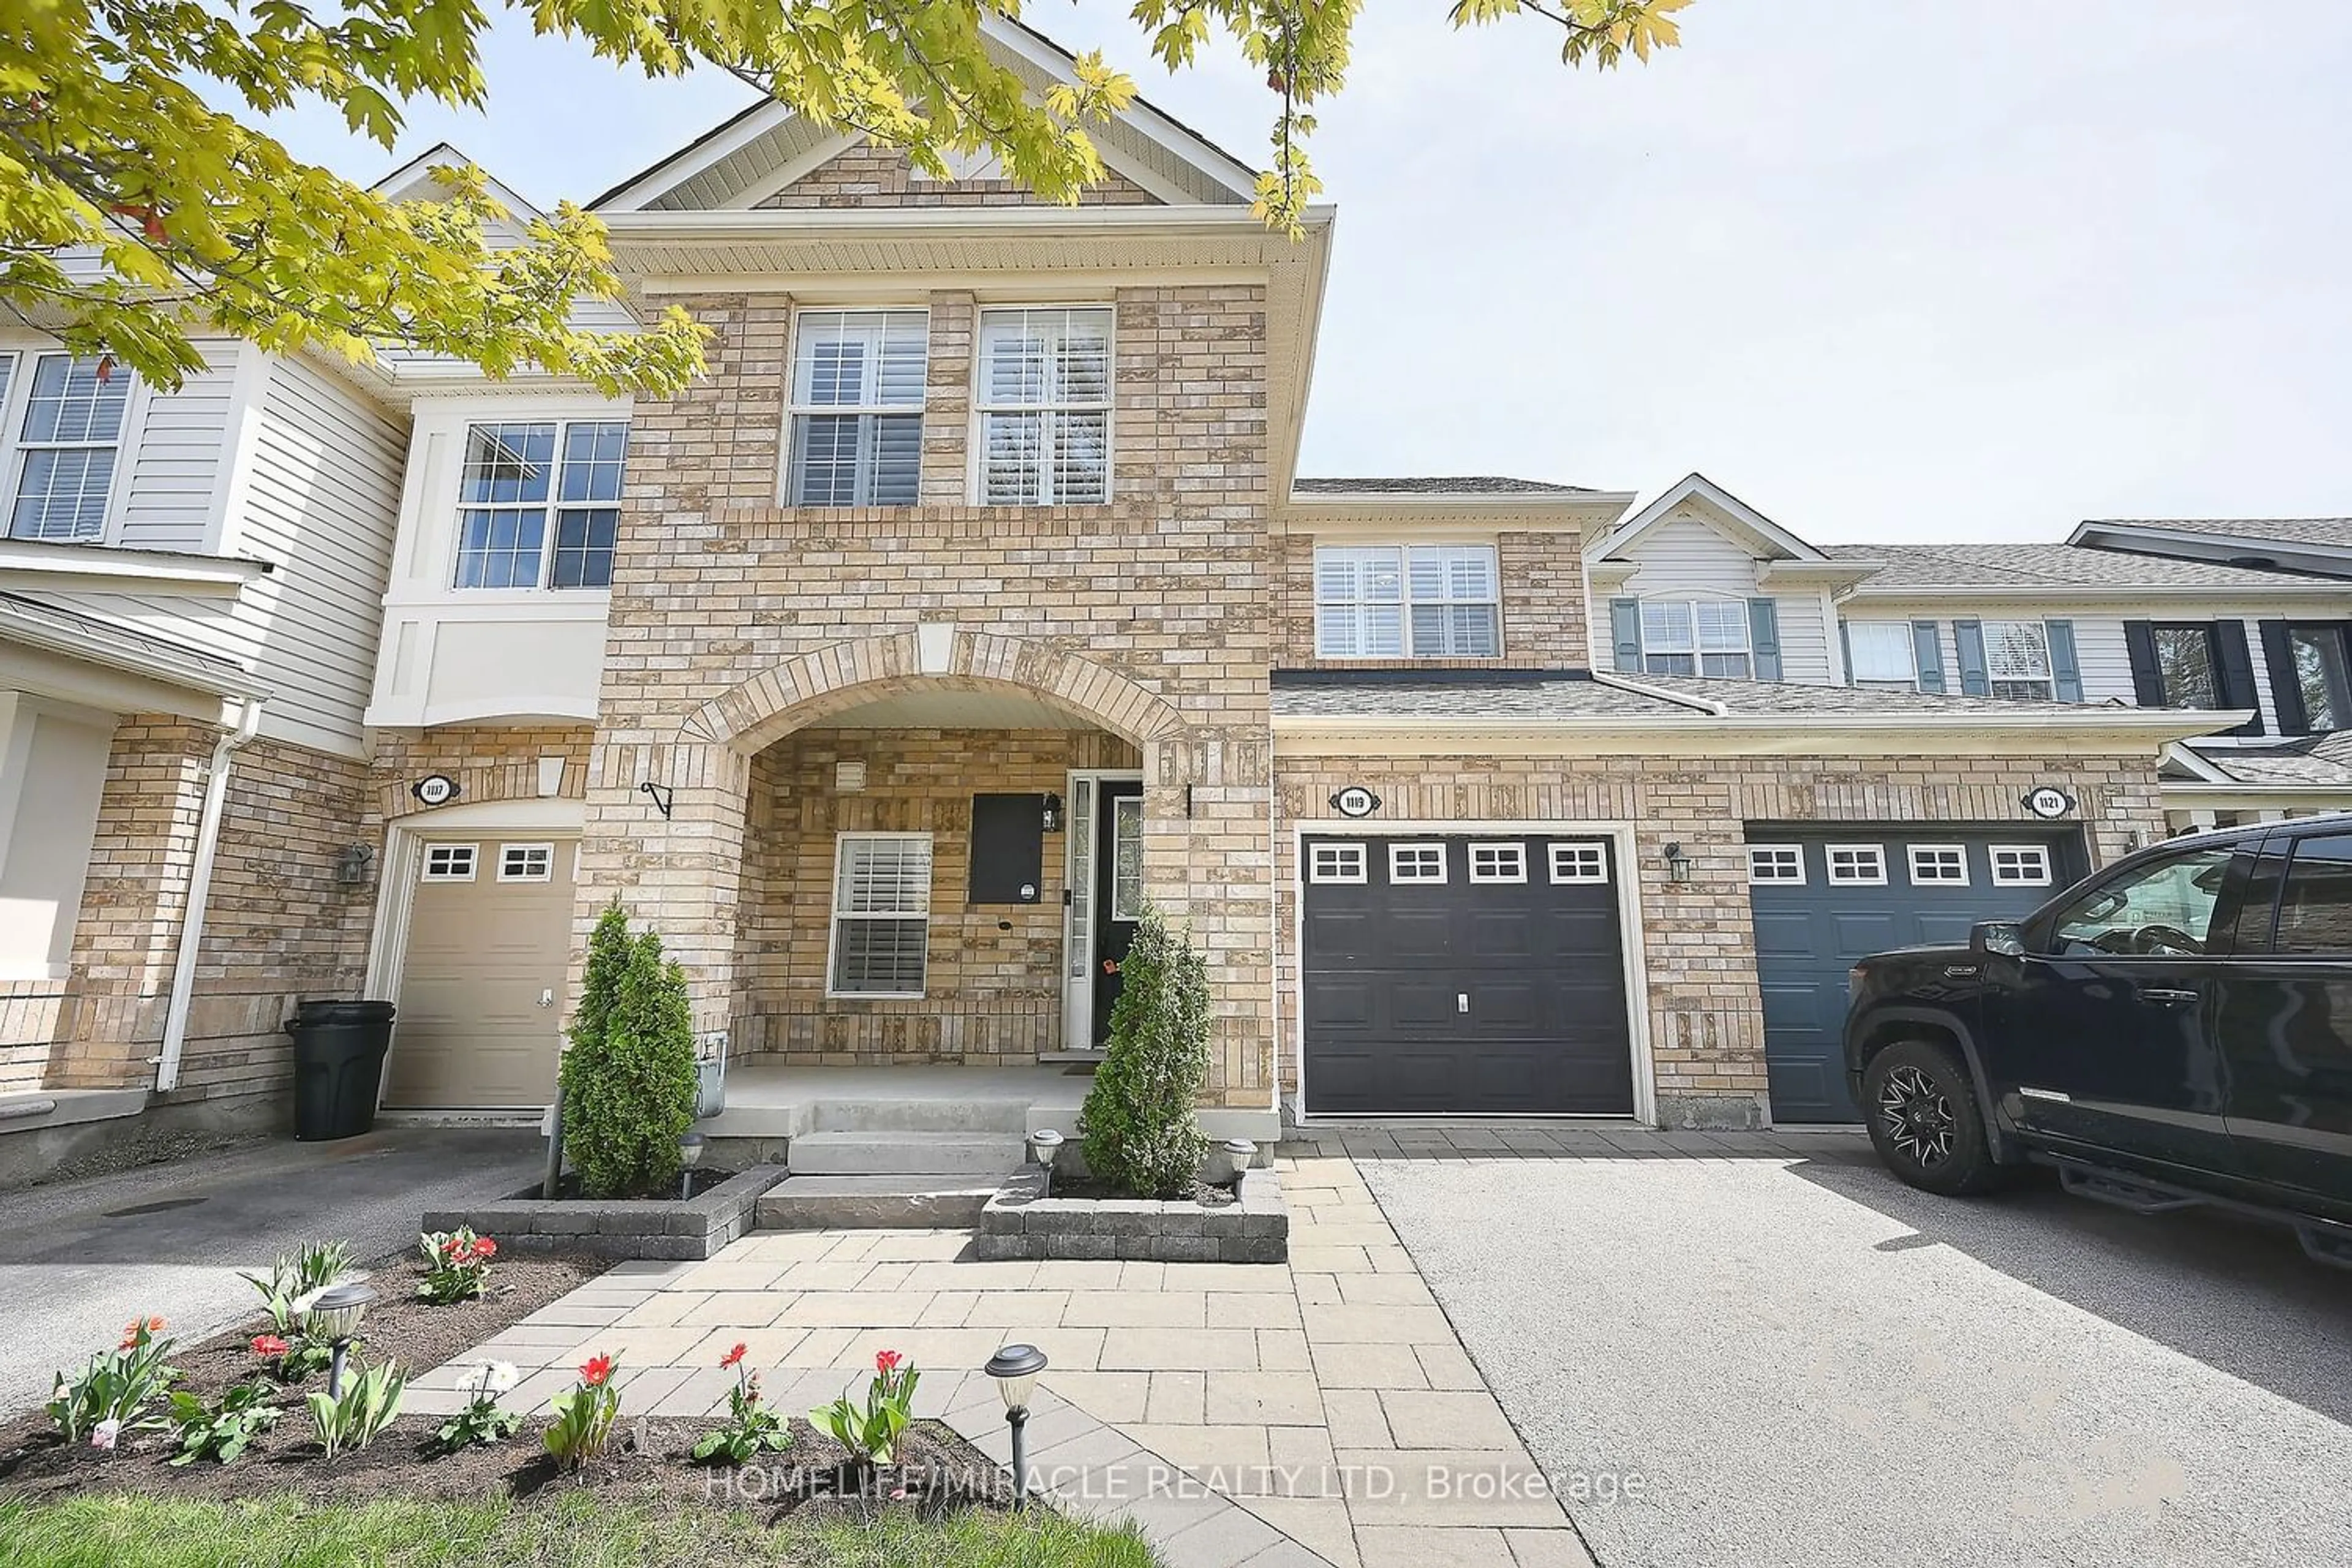 Home with brick exterior material for 1119 Barclay Circ, Milton Ontario L9T 5W4